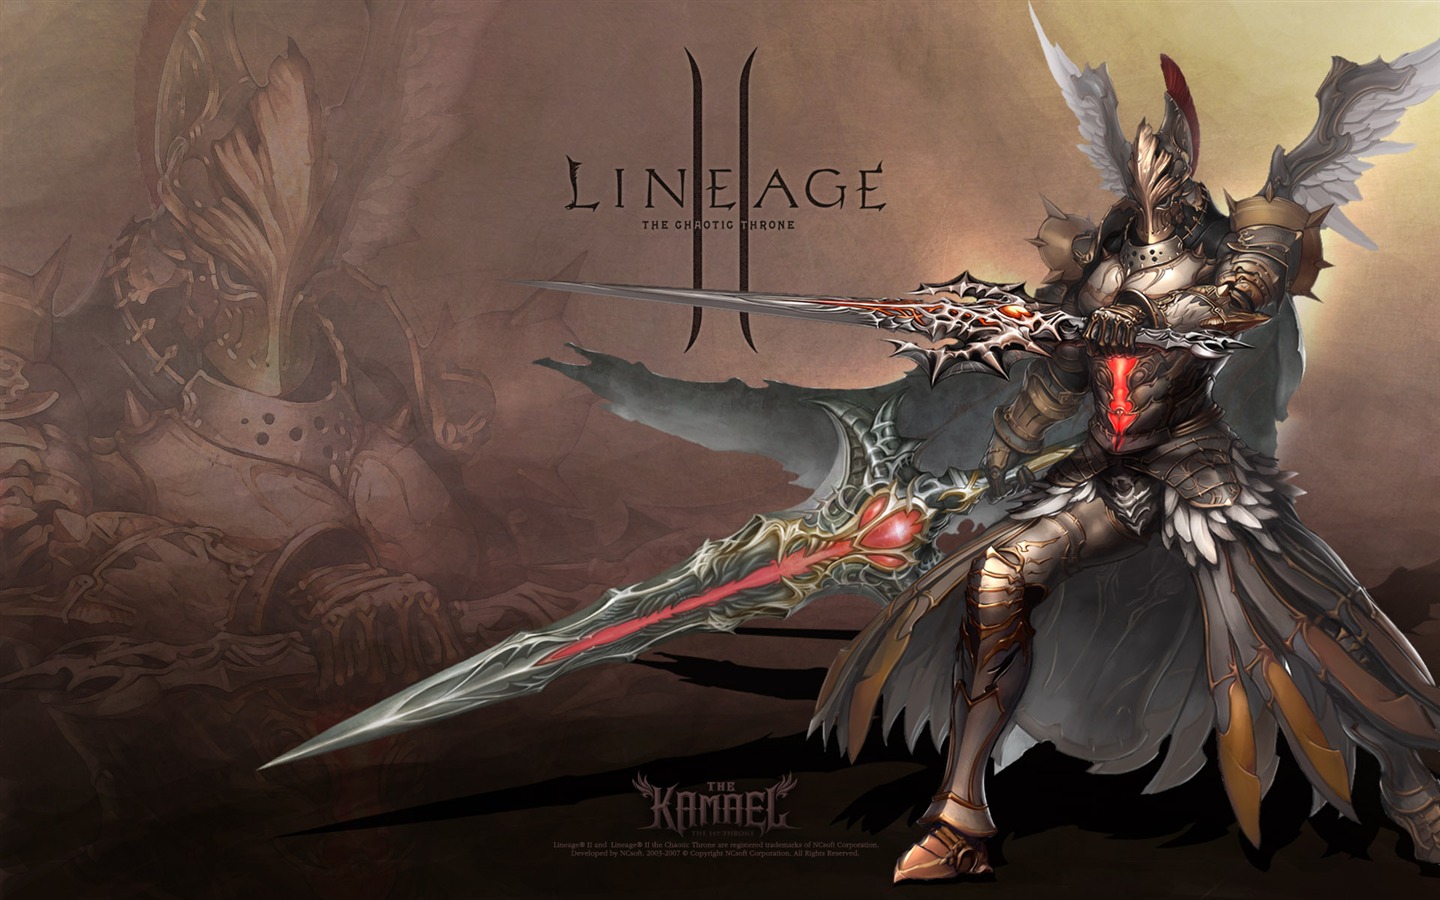 LINEAGE Ⅱ modeling HD gaming wallpapers #9 - 1440x900